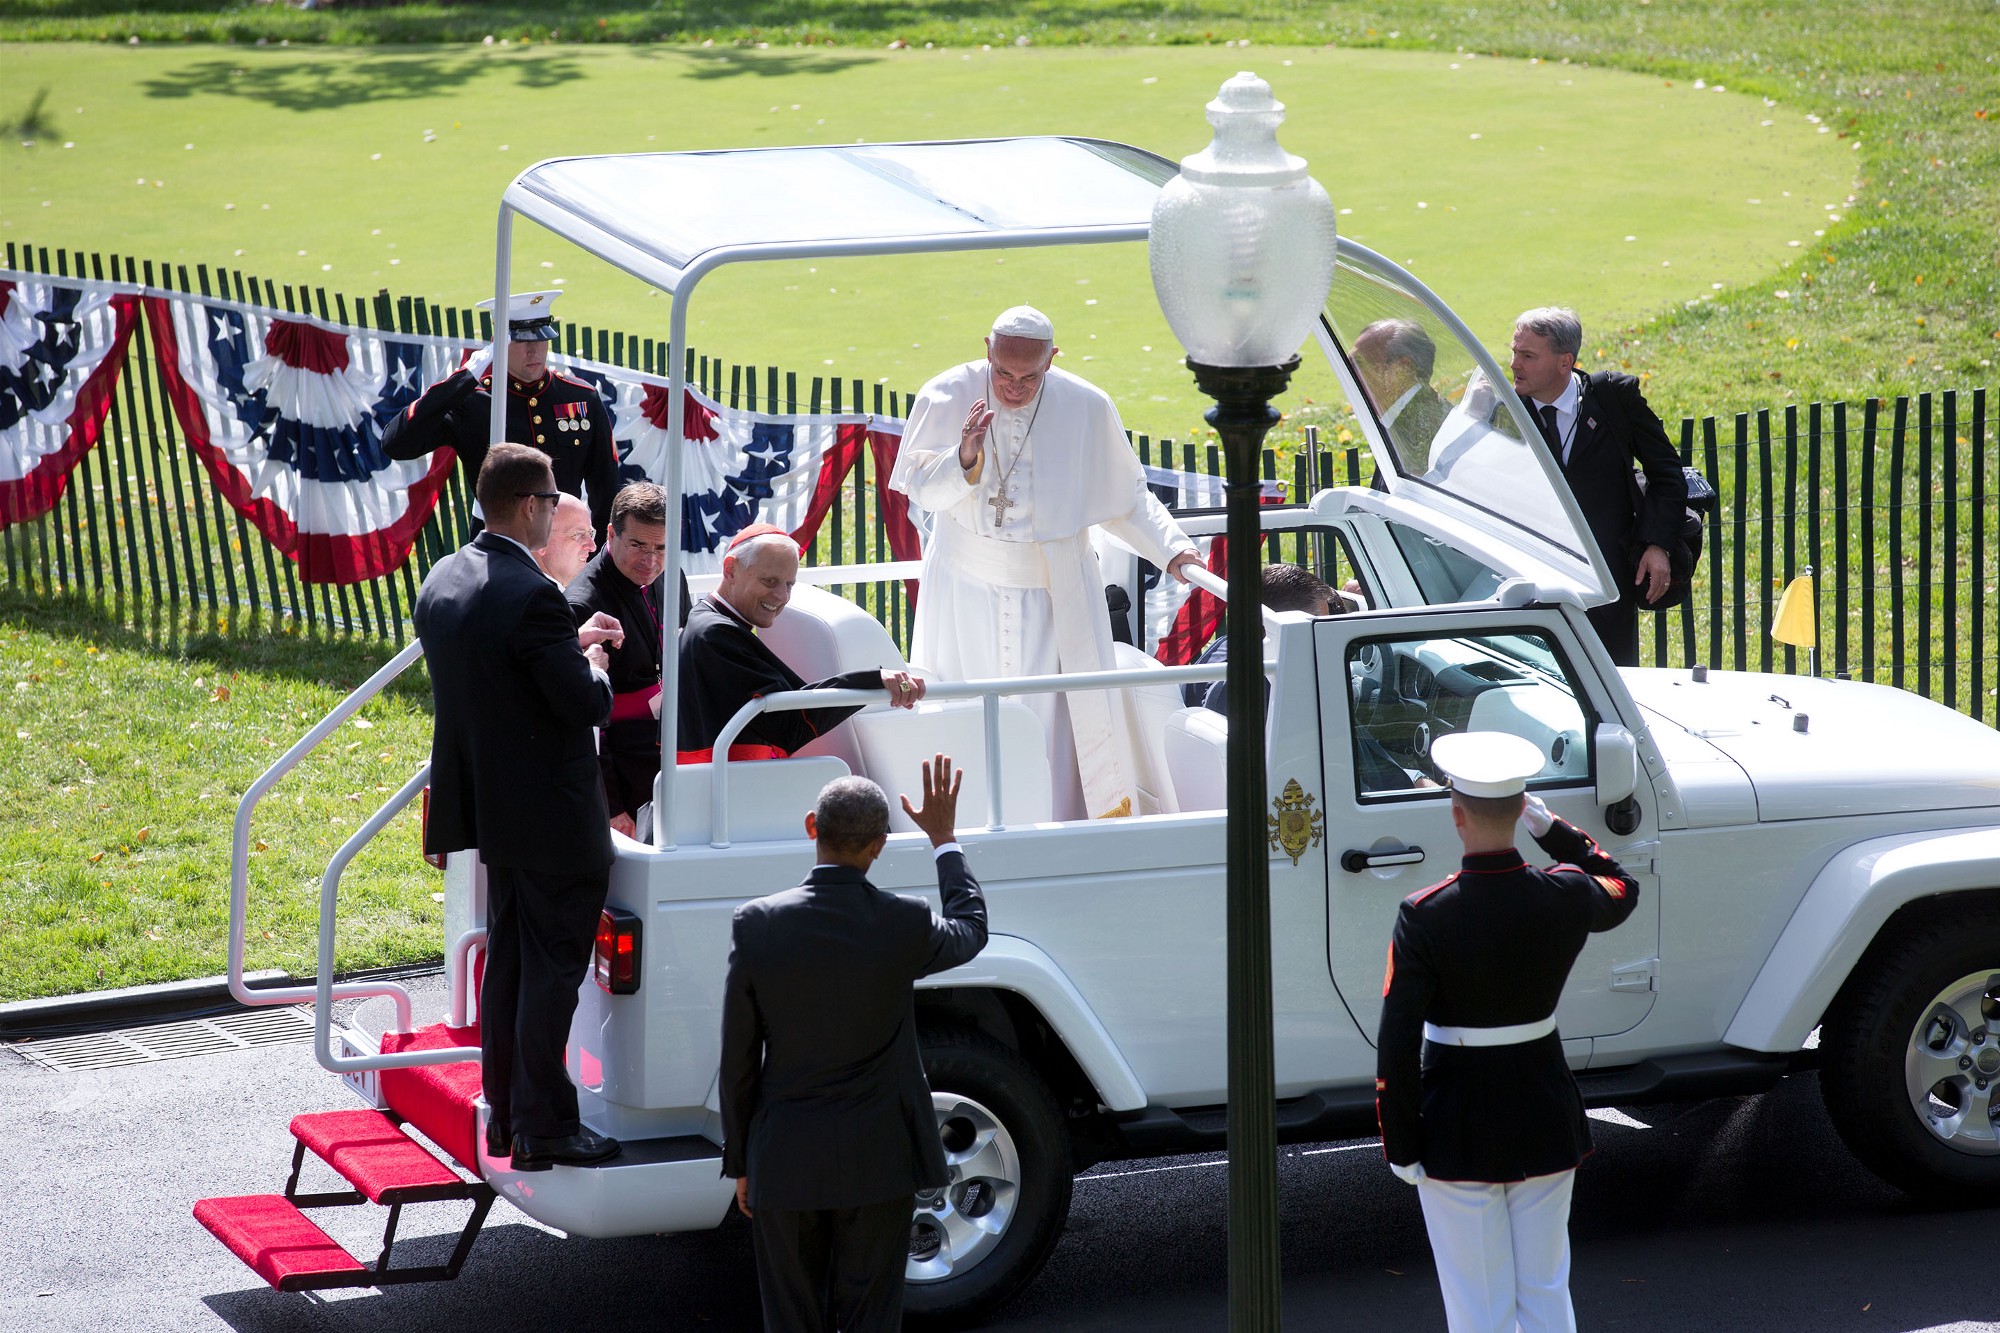 The President bids the Pope farewell. (Official White House Photo by Lawrence Jackson)